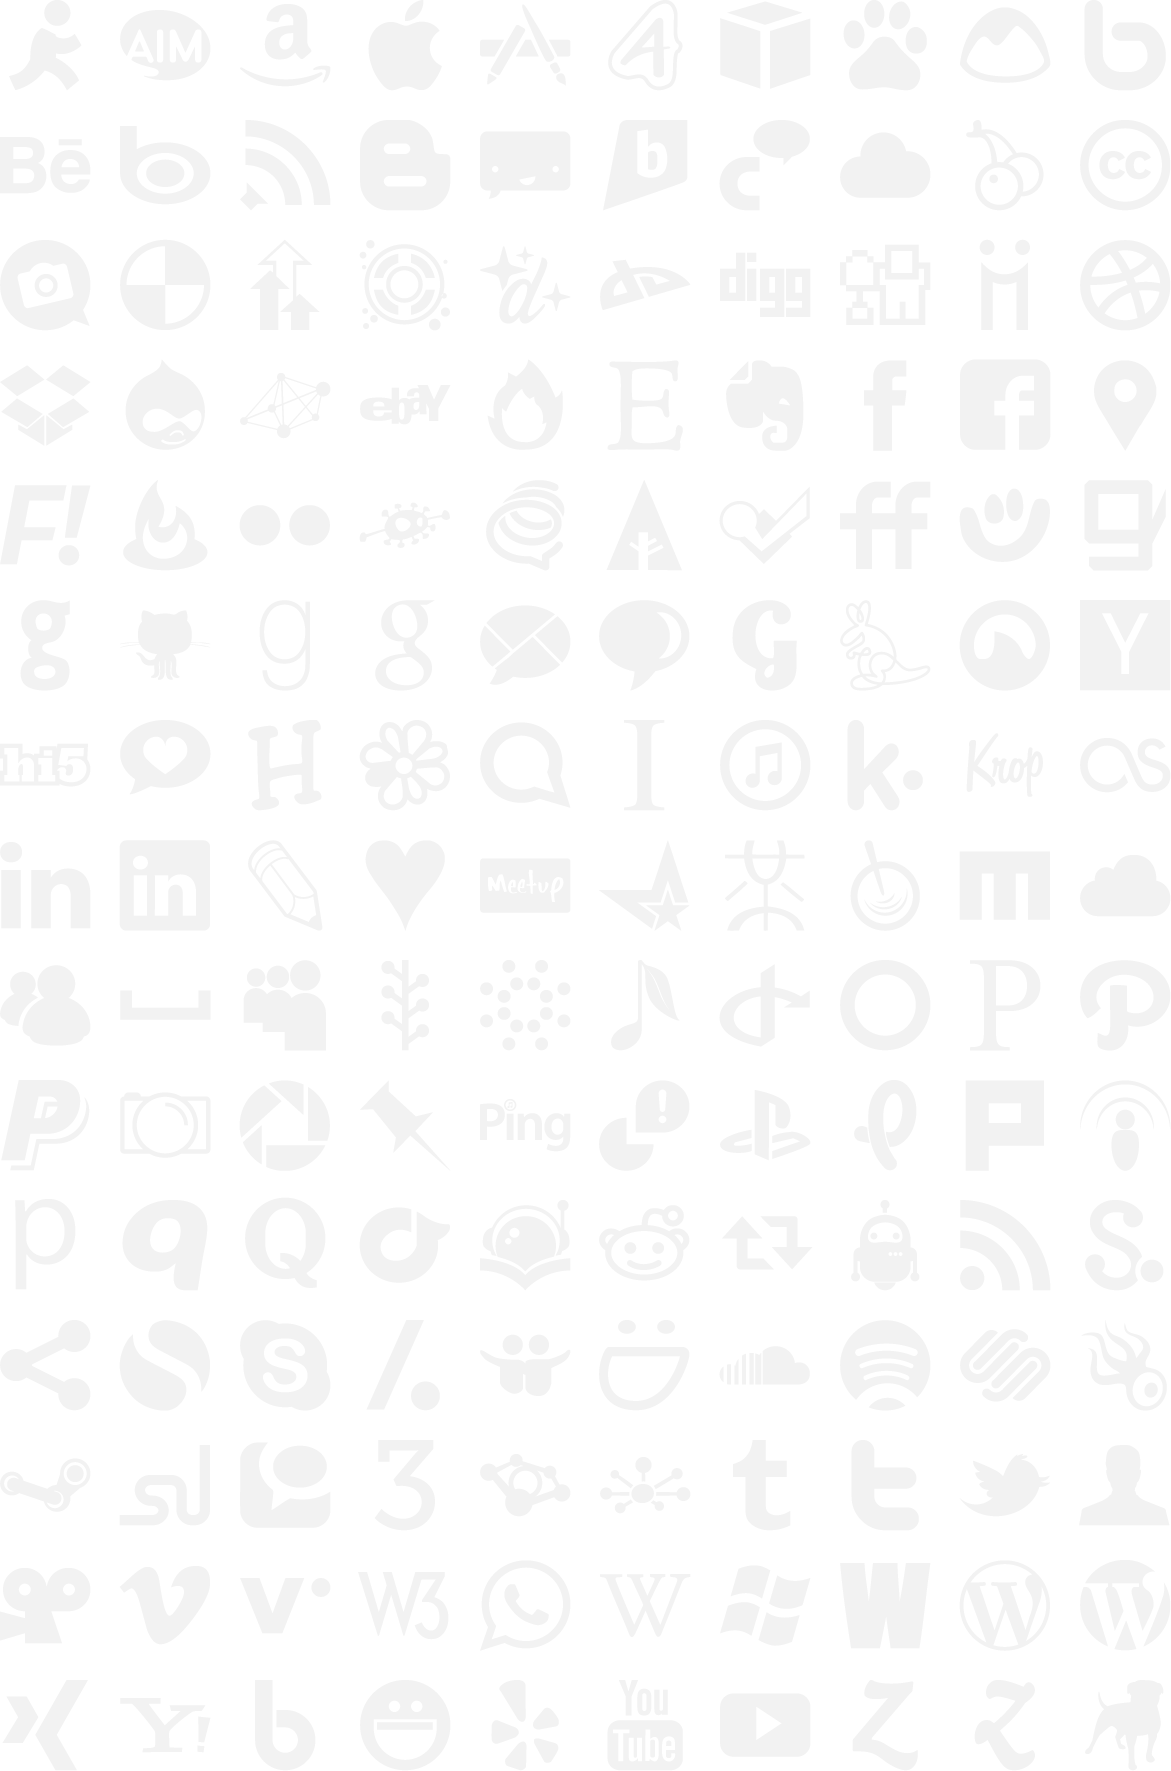 Download Less File Social Icons Less Grey Black White Png Transparent Background Free Download 15 Freeiconspng